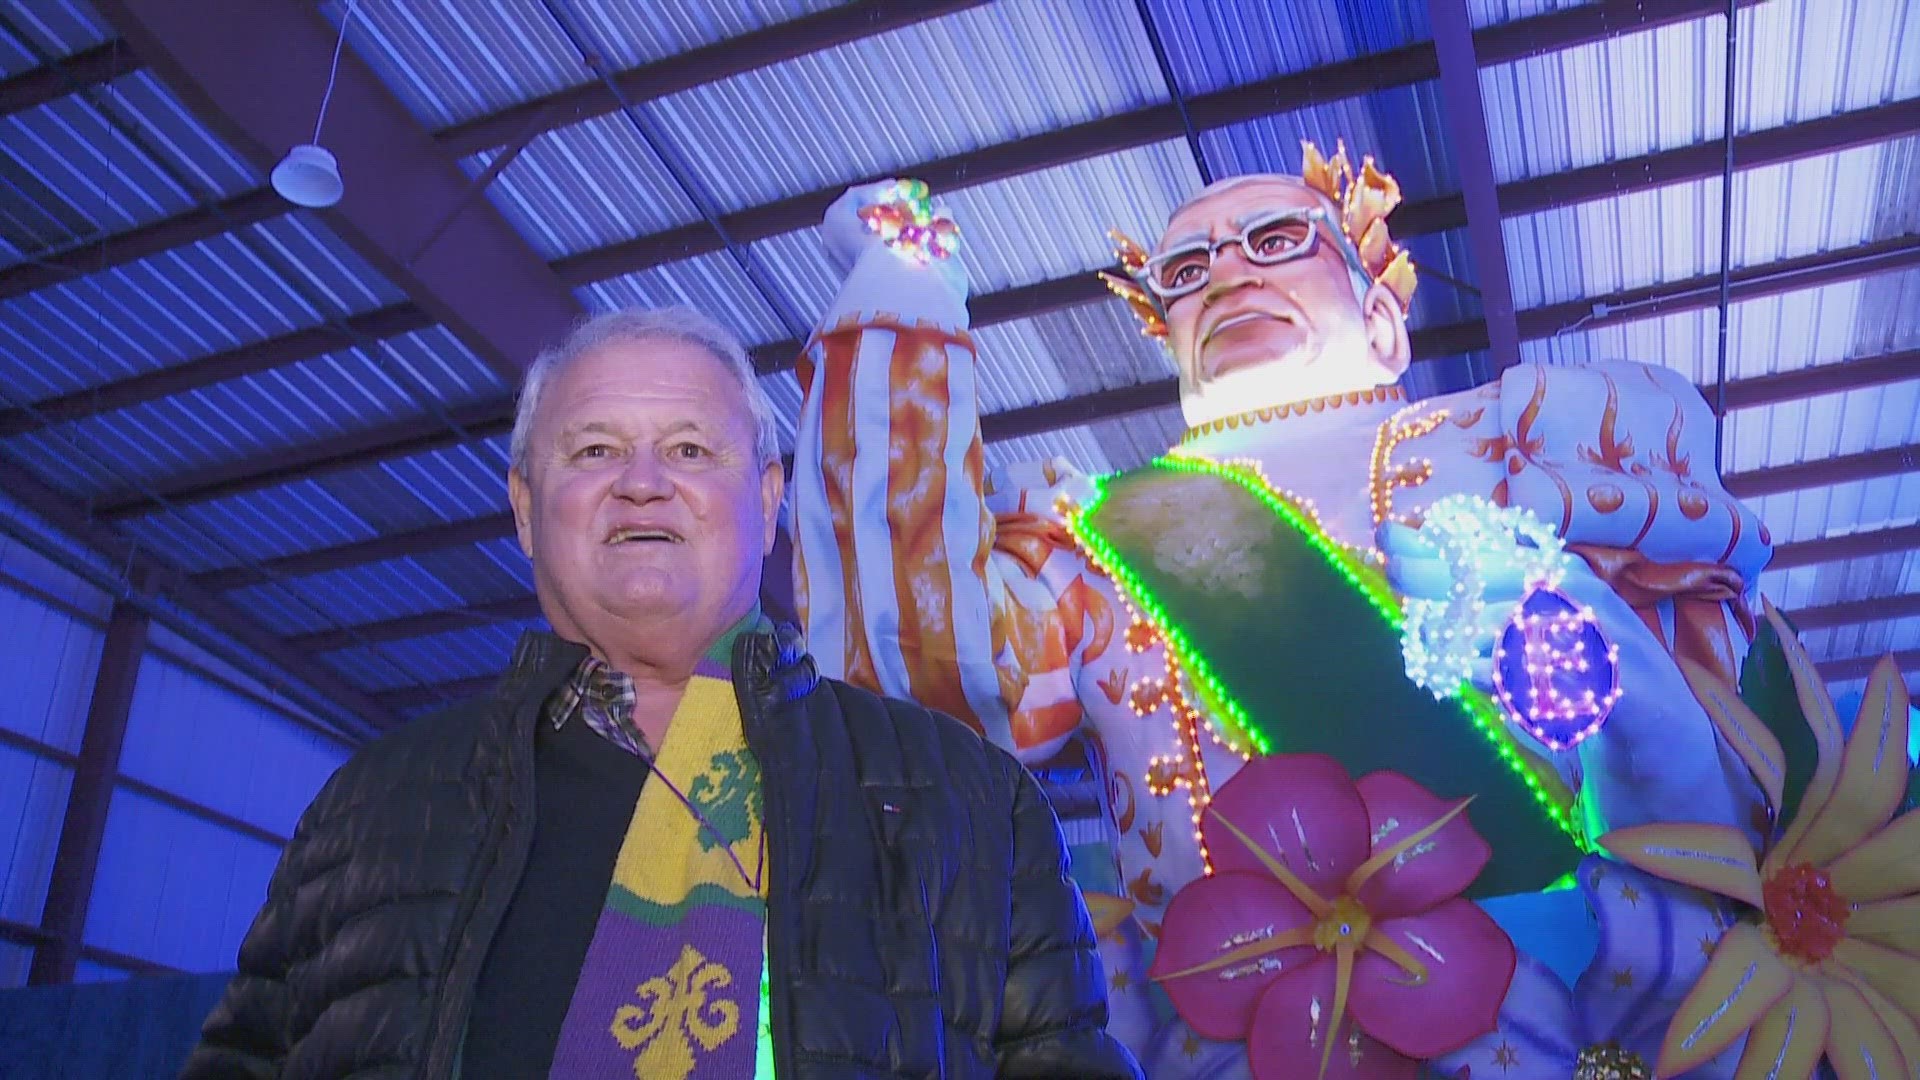 Ed Muniz, the founder of the Krewe of Endymion and former Mayor of Kenner, passed away Saturday morning at the age of 83.